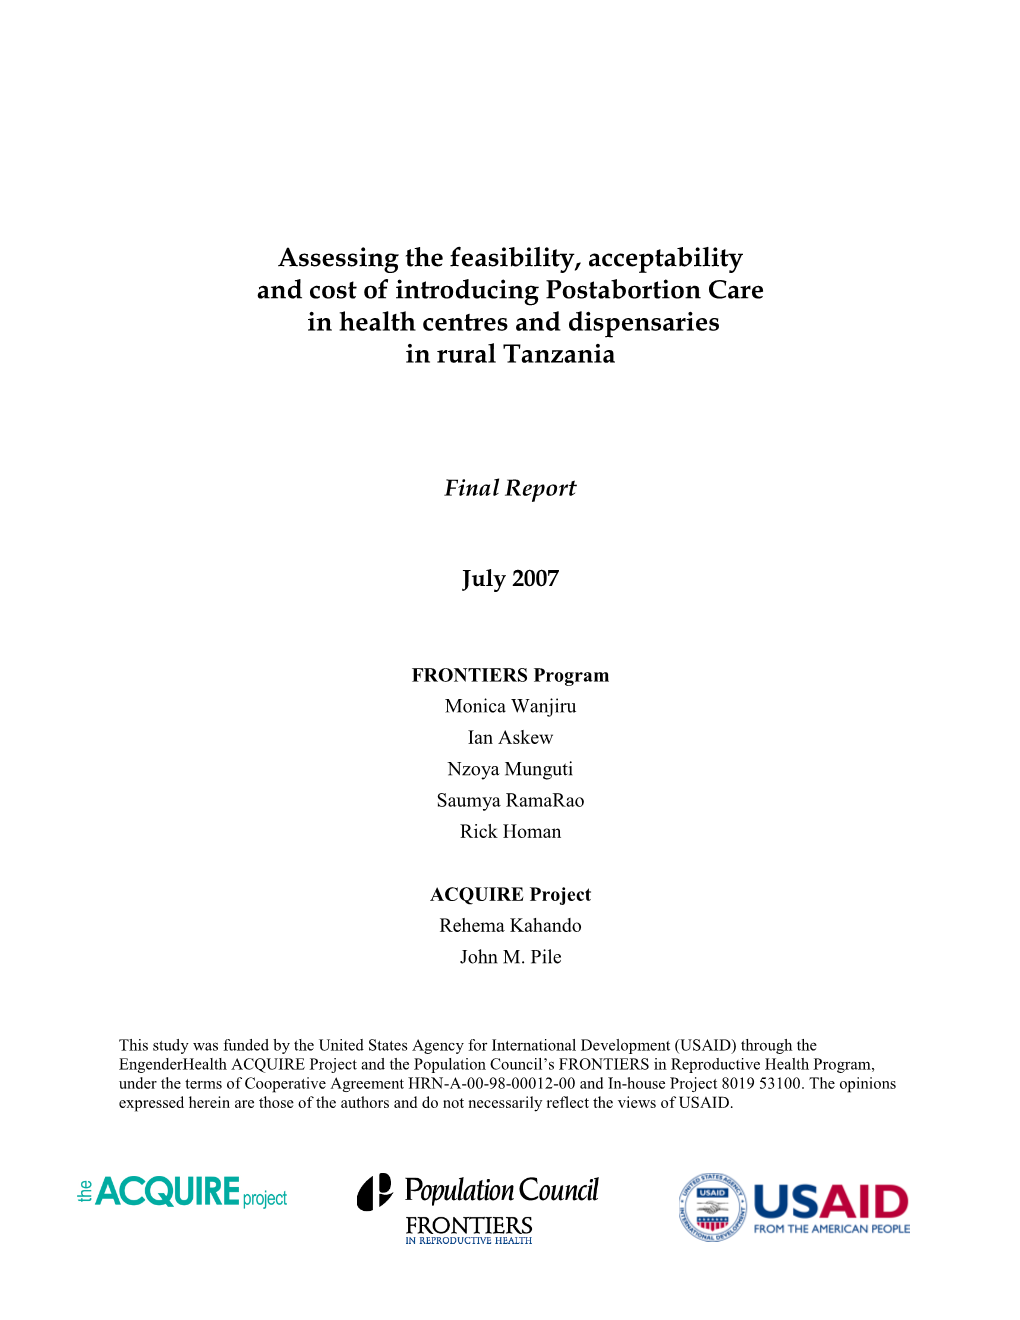 Assessing the Feasibility, Acceptability and Cost of Introducing Postabortion Care in Health Centres and Dispensaries in Rural Tanzania